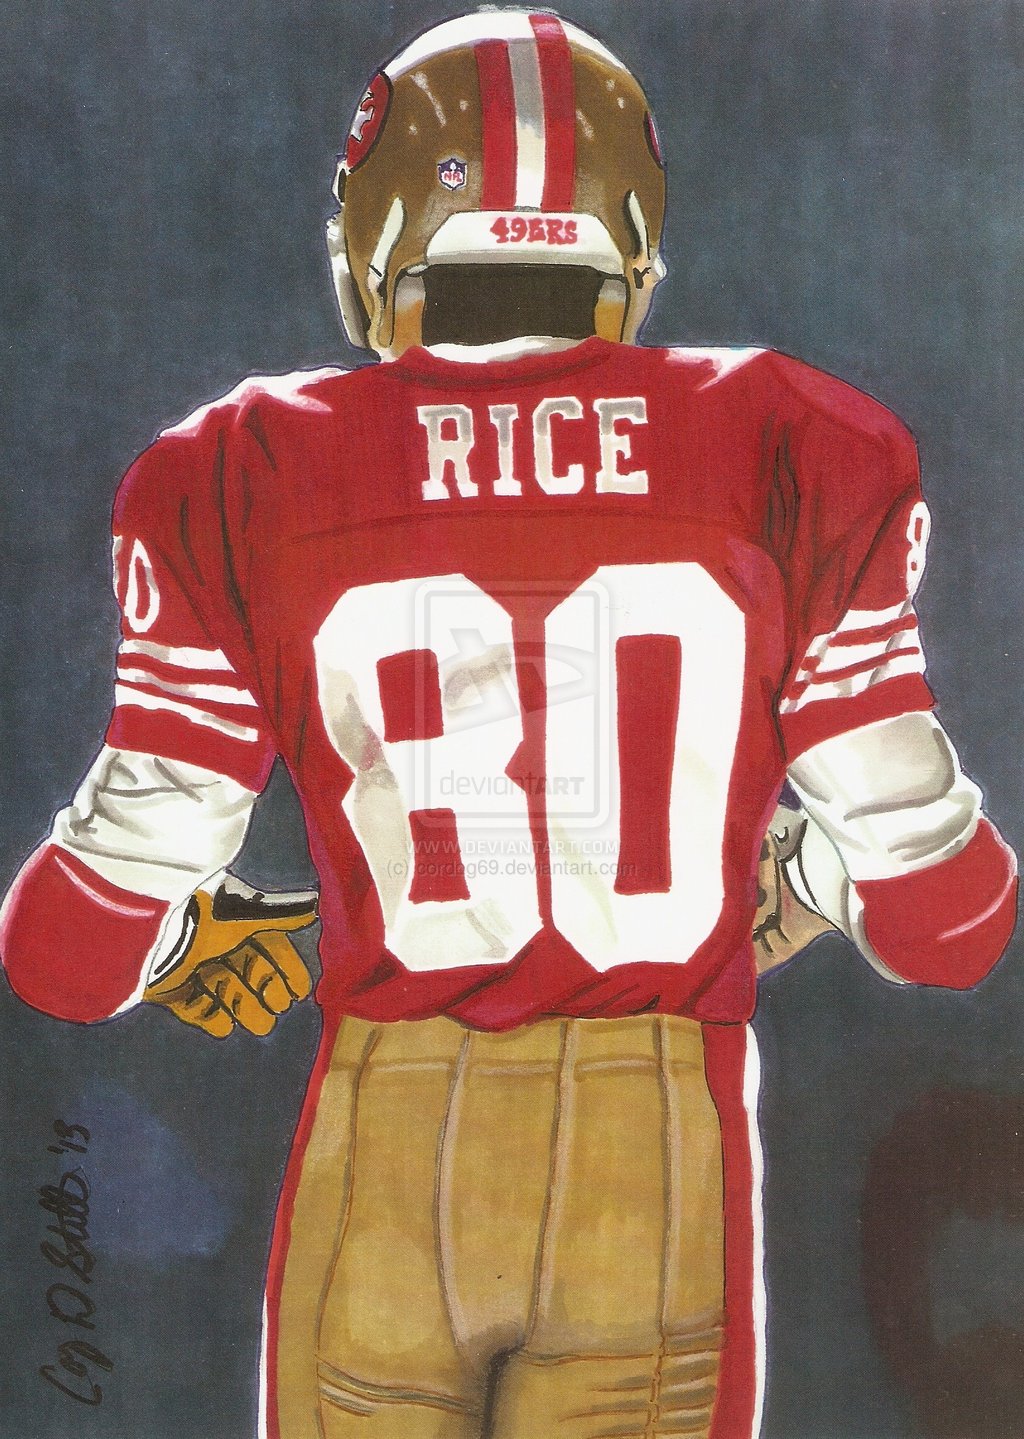 Jerry Rice By Cordog69